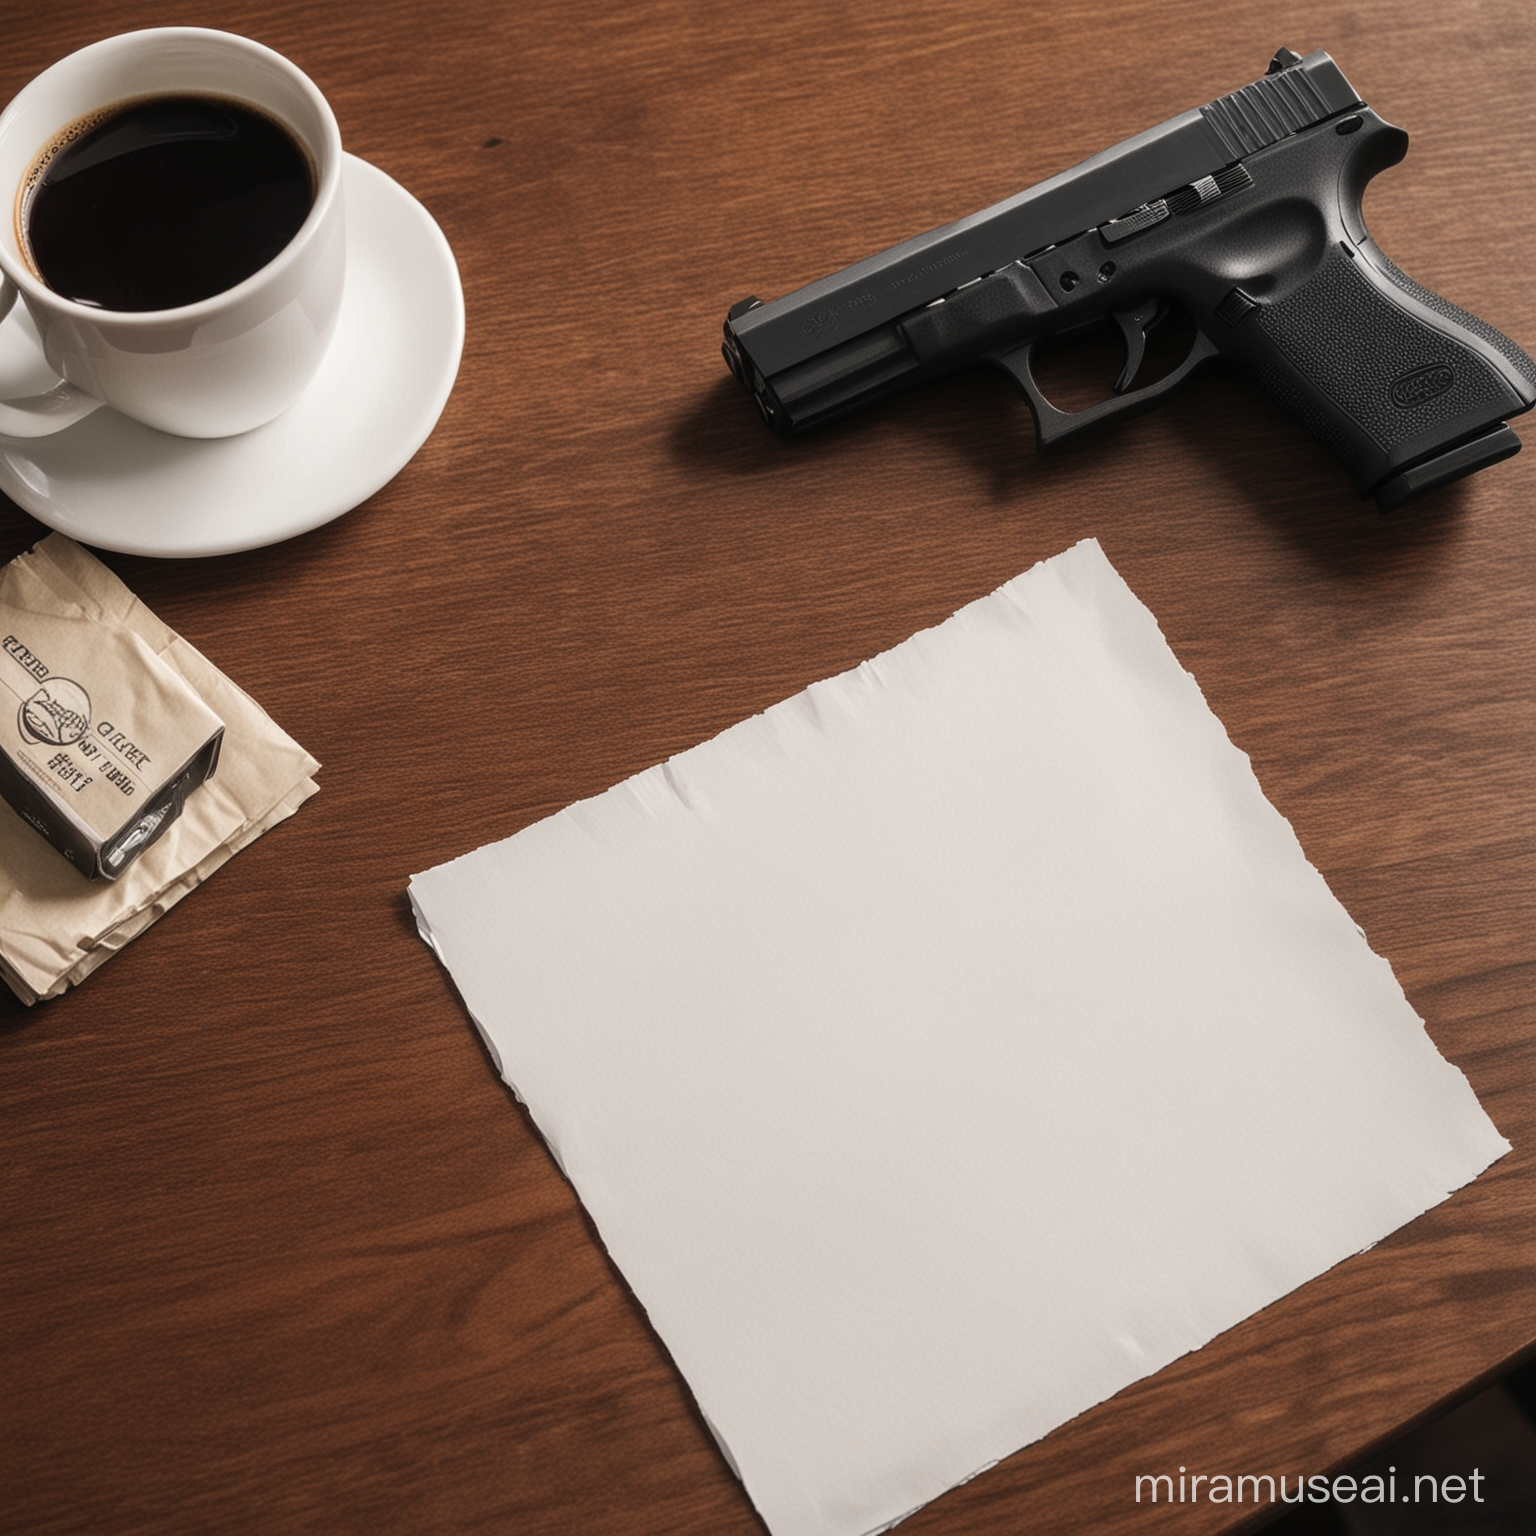 a dining room table with a blank piece of white paper, a cup of coffee, and a glock pistol.